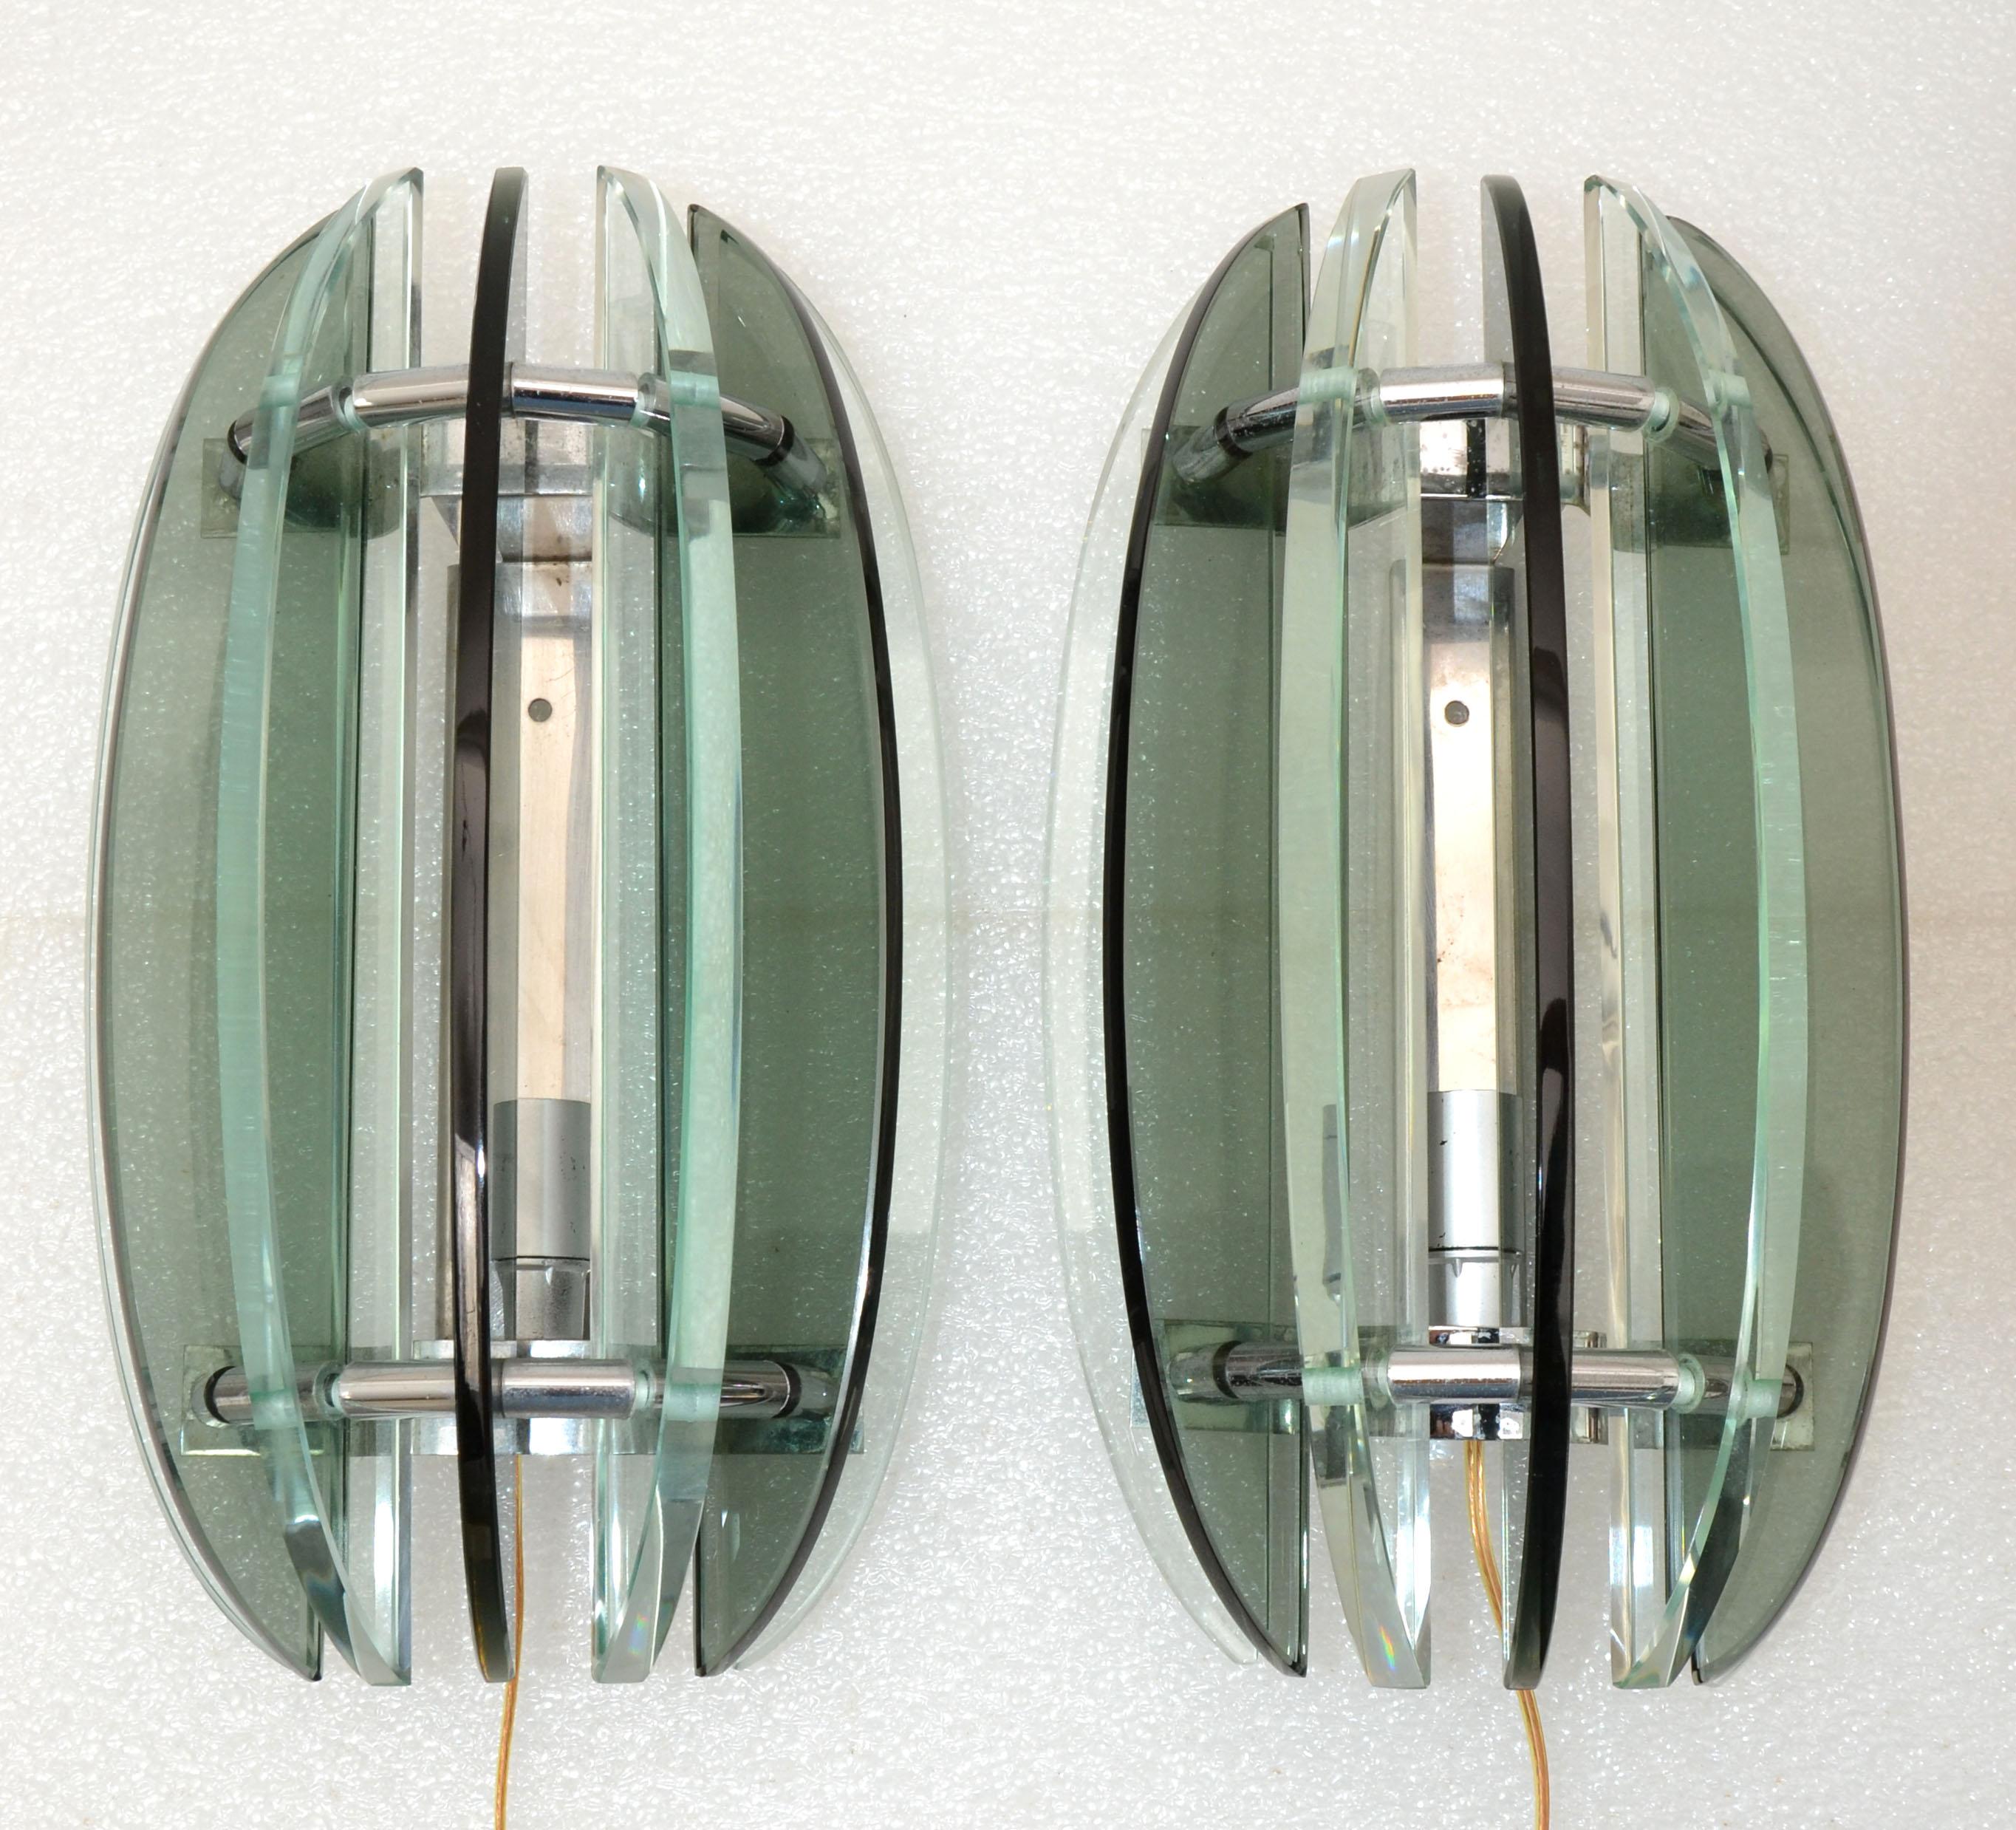 Pair of Italian sconces stamped Veca. Smoke and clear green glass.
Featuring seven alternating pieces of glass on a chrome base.
US rewired and each sconce takes a max 60 watts candelabra bulb or LED.
Have a look on our impressive collection of